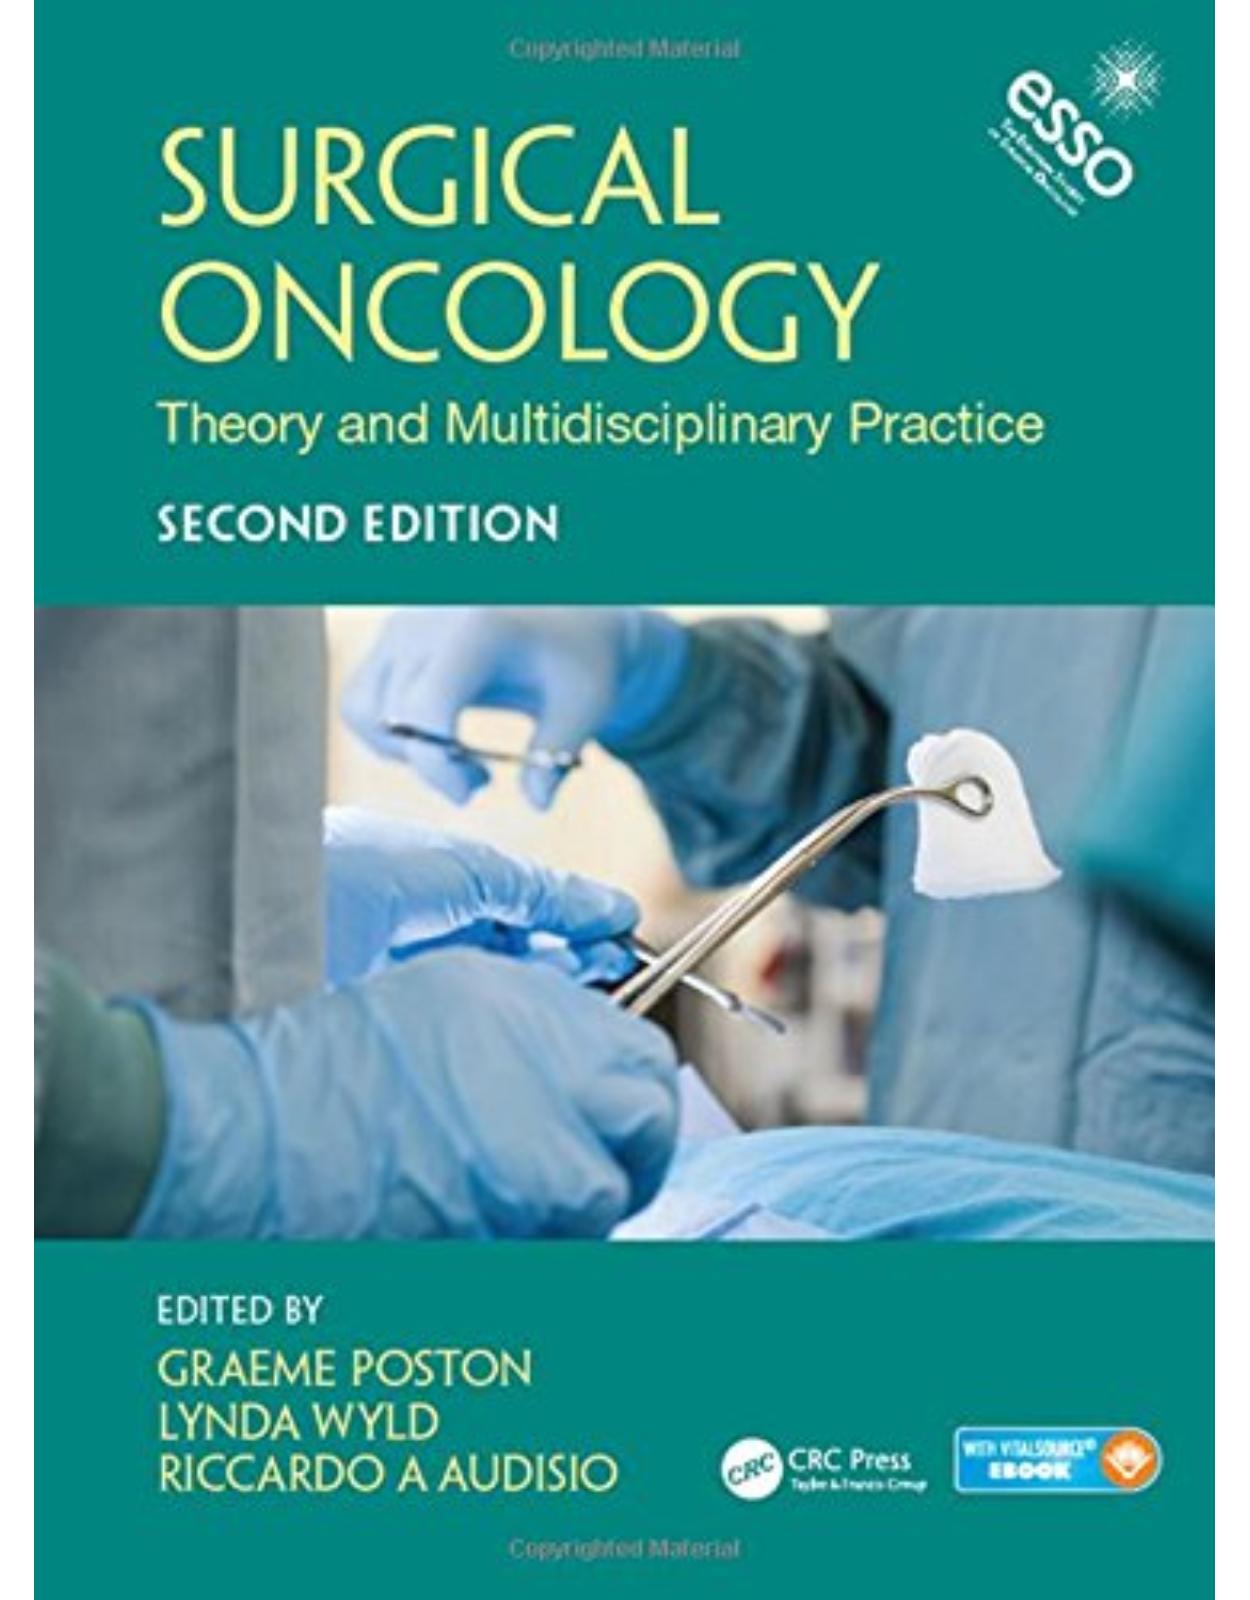 Surgical Oncology: Theory and Multidisciplinary Practice, Second Edition 